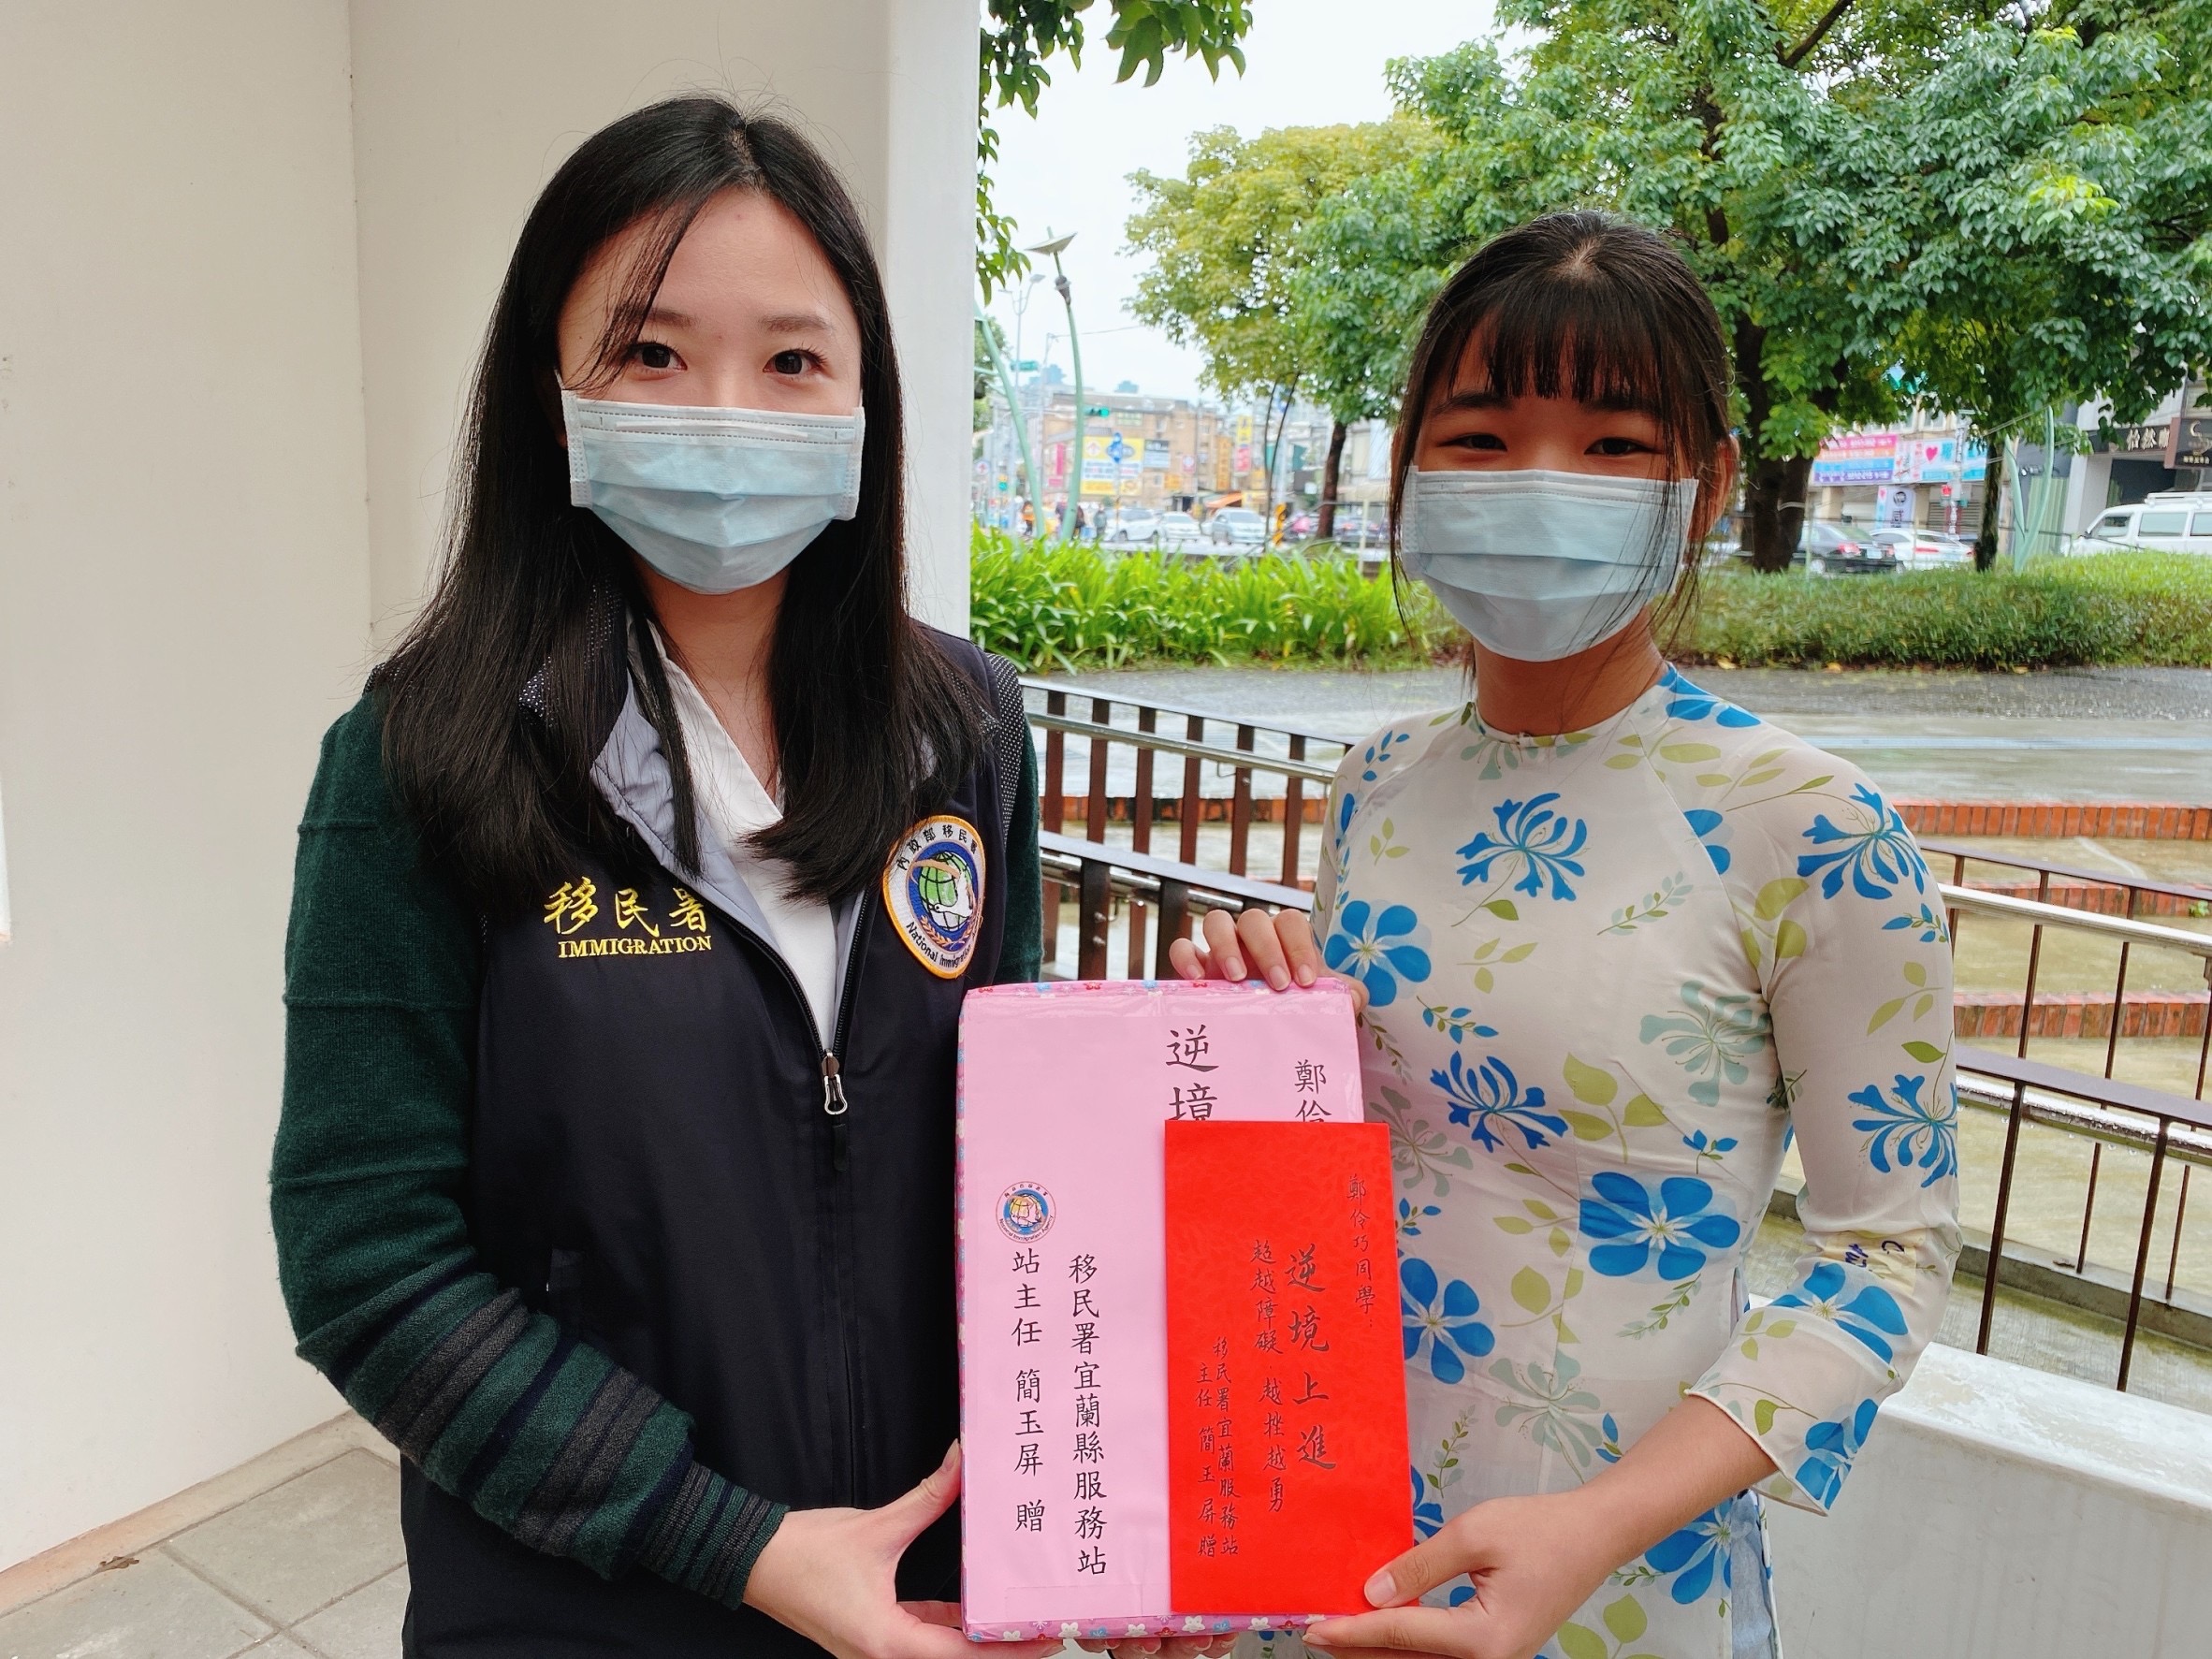 NIA (Yilan County Service Center) presented gifts to Cheng Ling-chiao.   (Photo / Provided by the Yilan County Service Center)